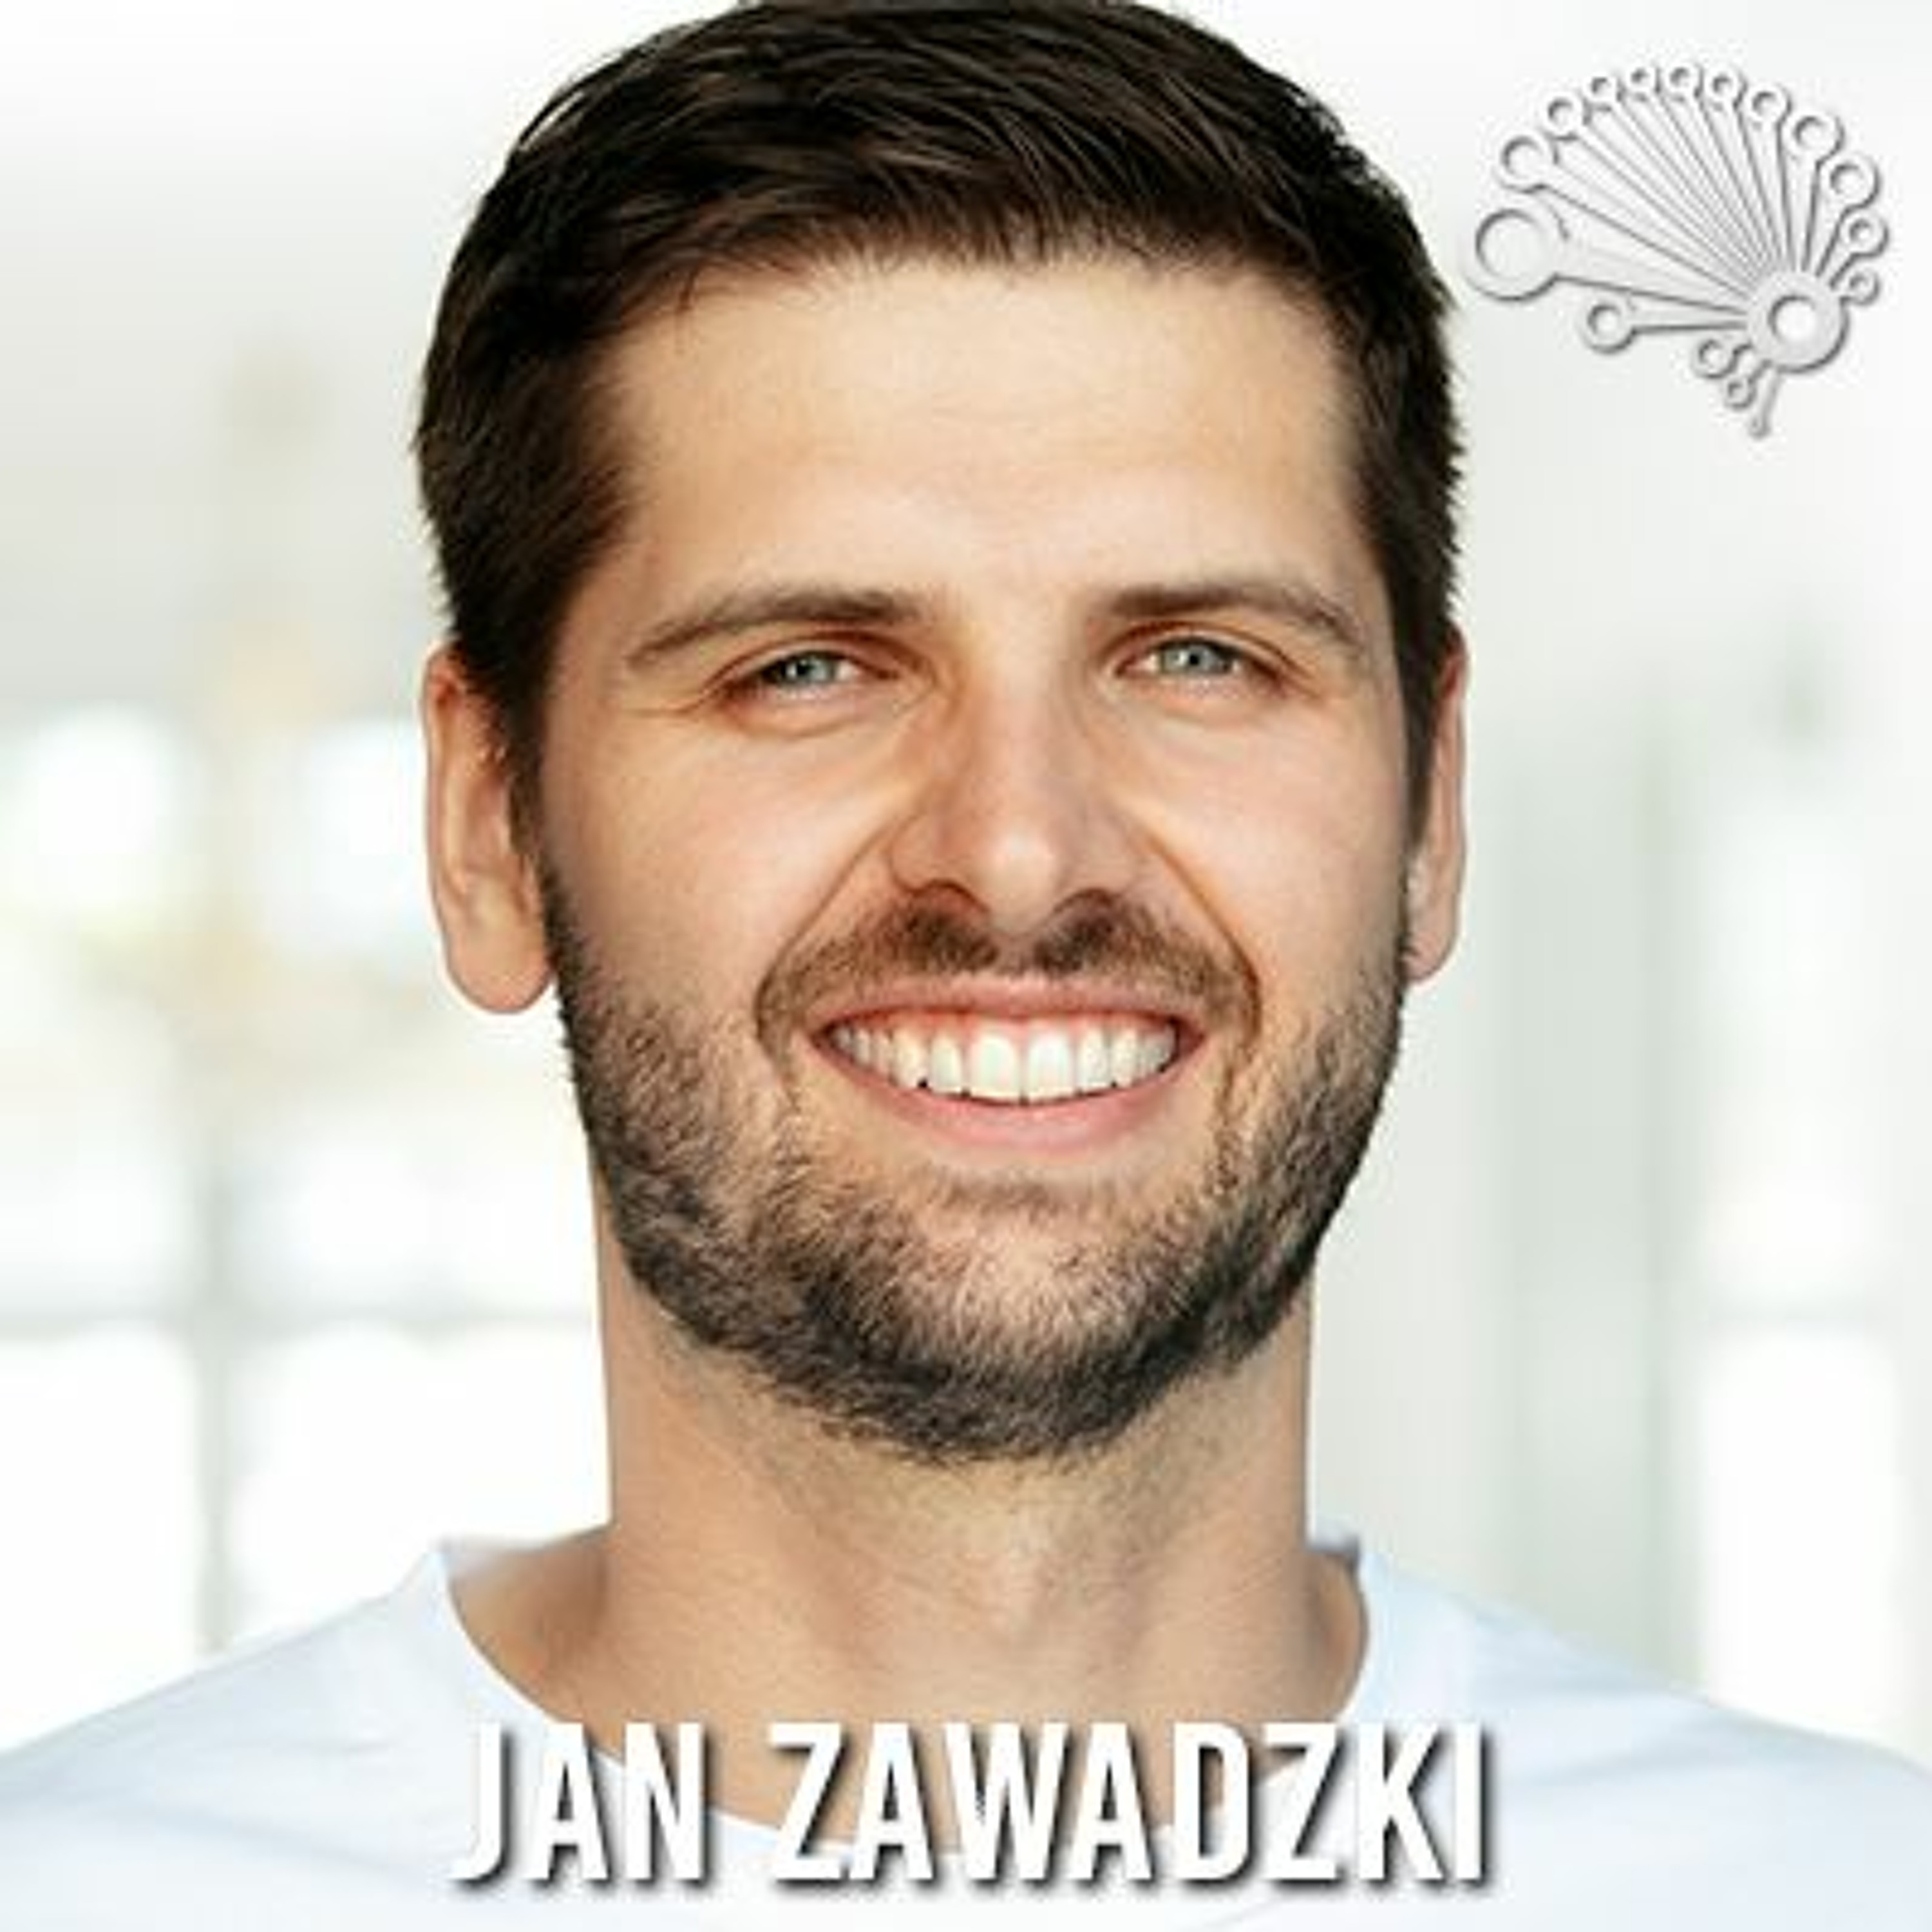 736: How to Officially Certify your AI Model, with Jan Zawadzki